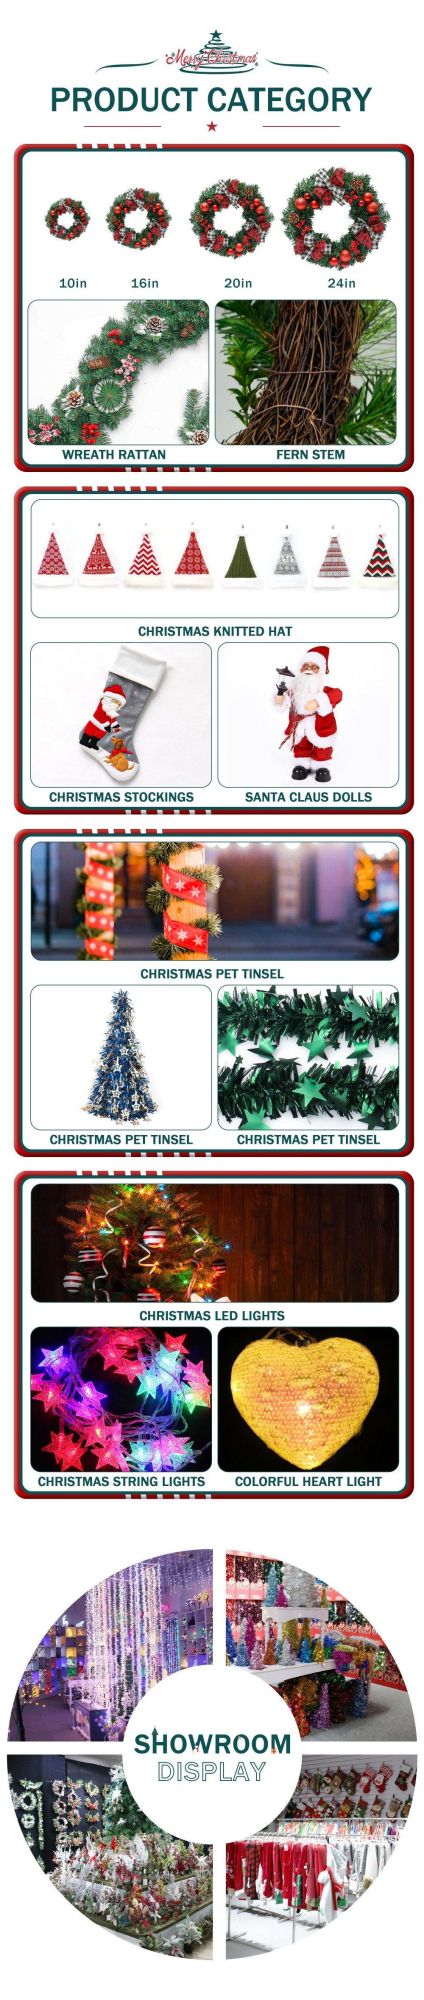 Pet Material Tinsel Garland Christmas Decoration Home Decorate